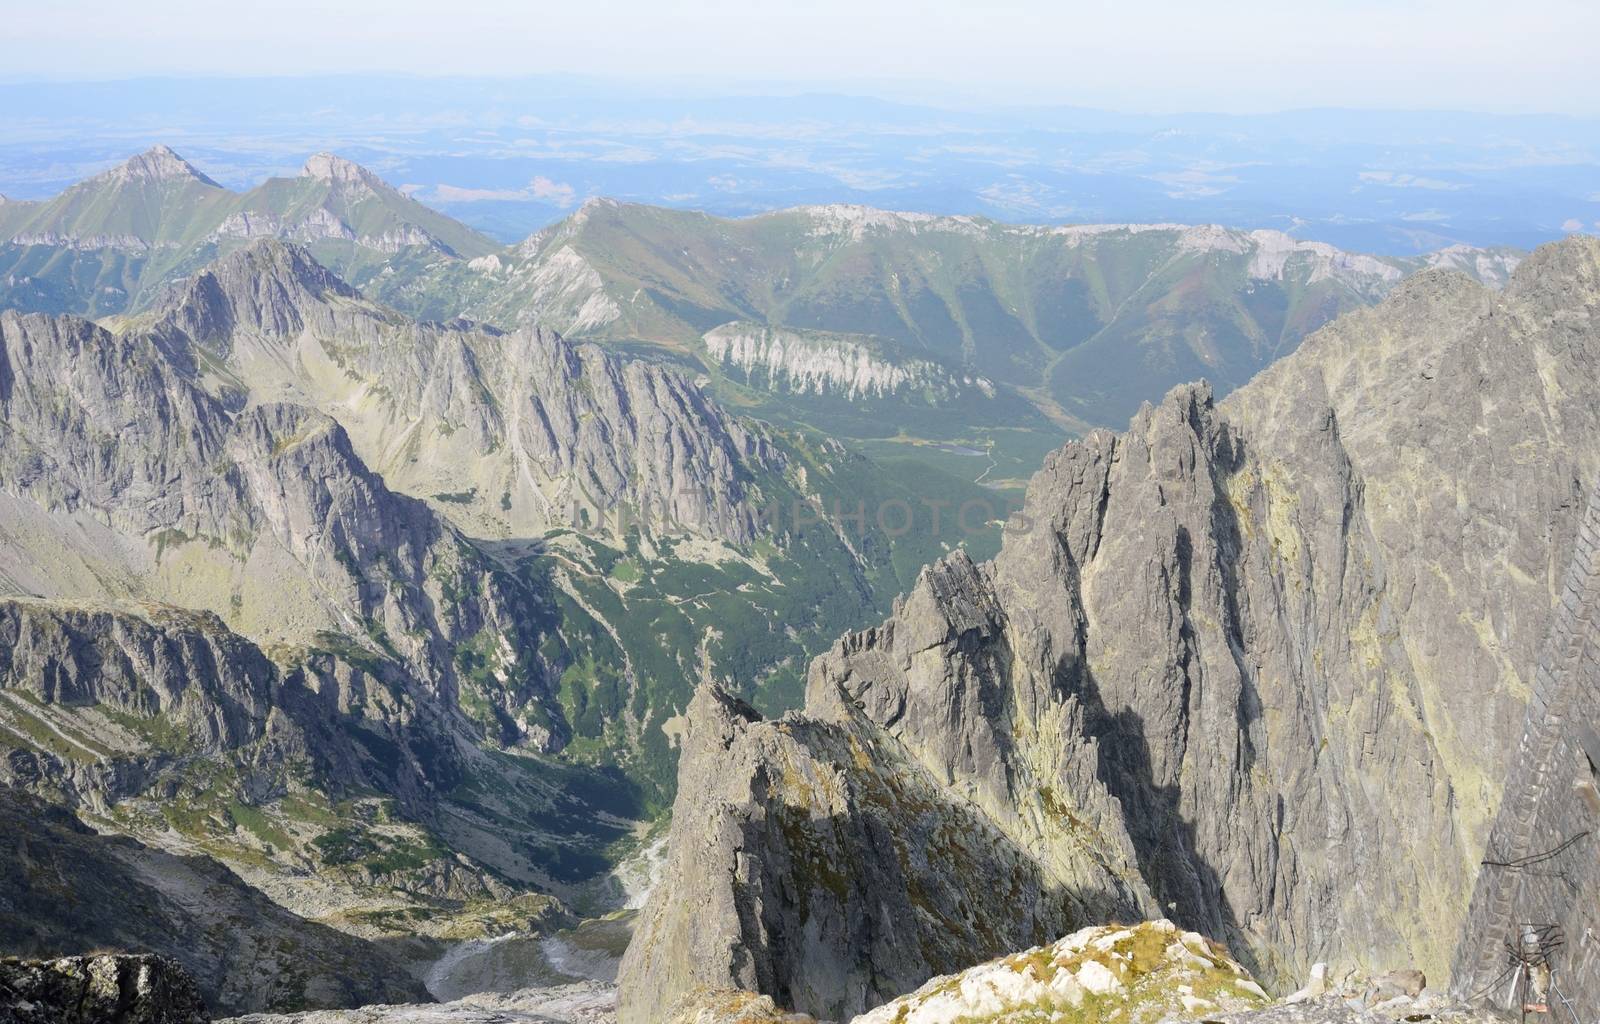 View of tatra mountains from Lomnicky stit